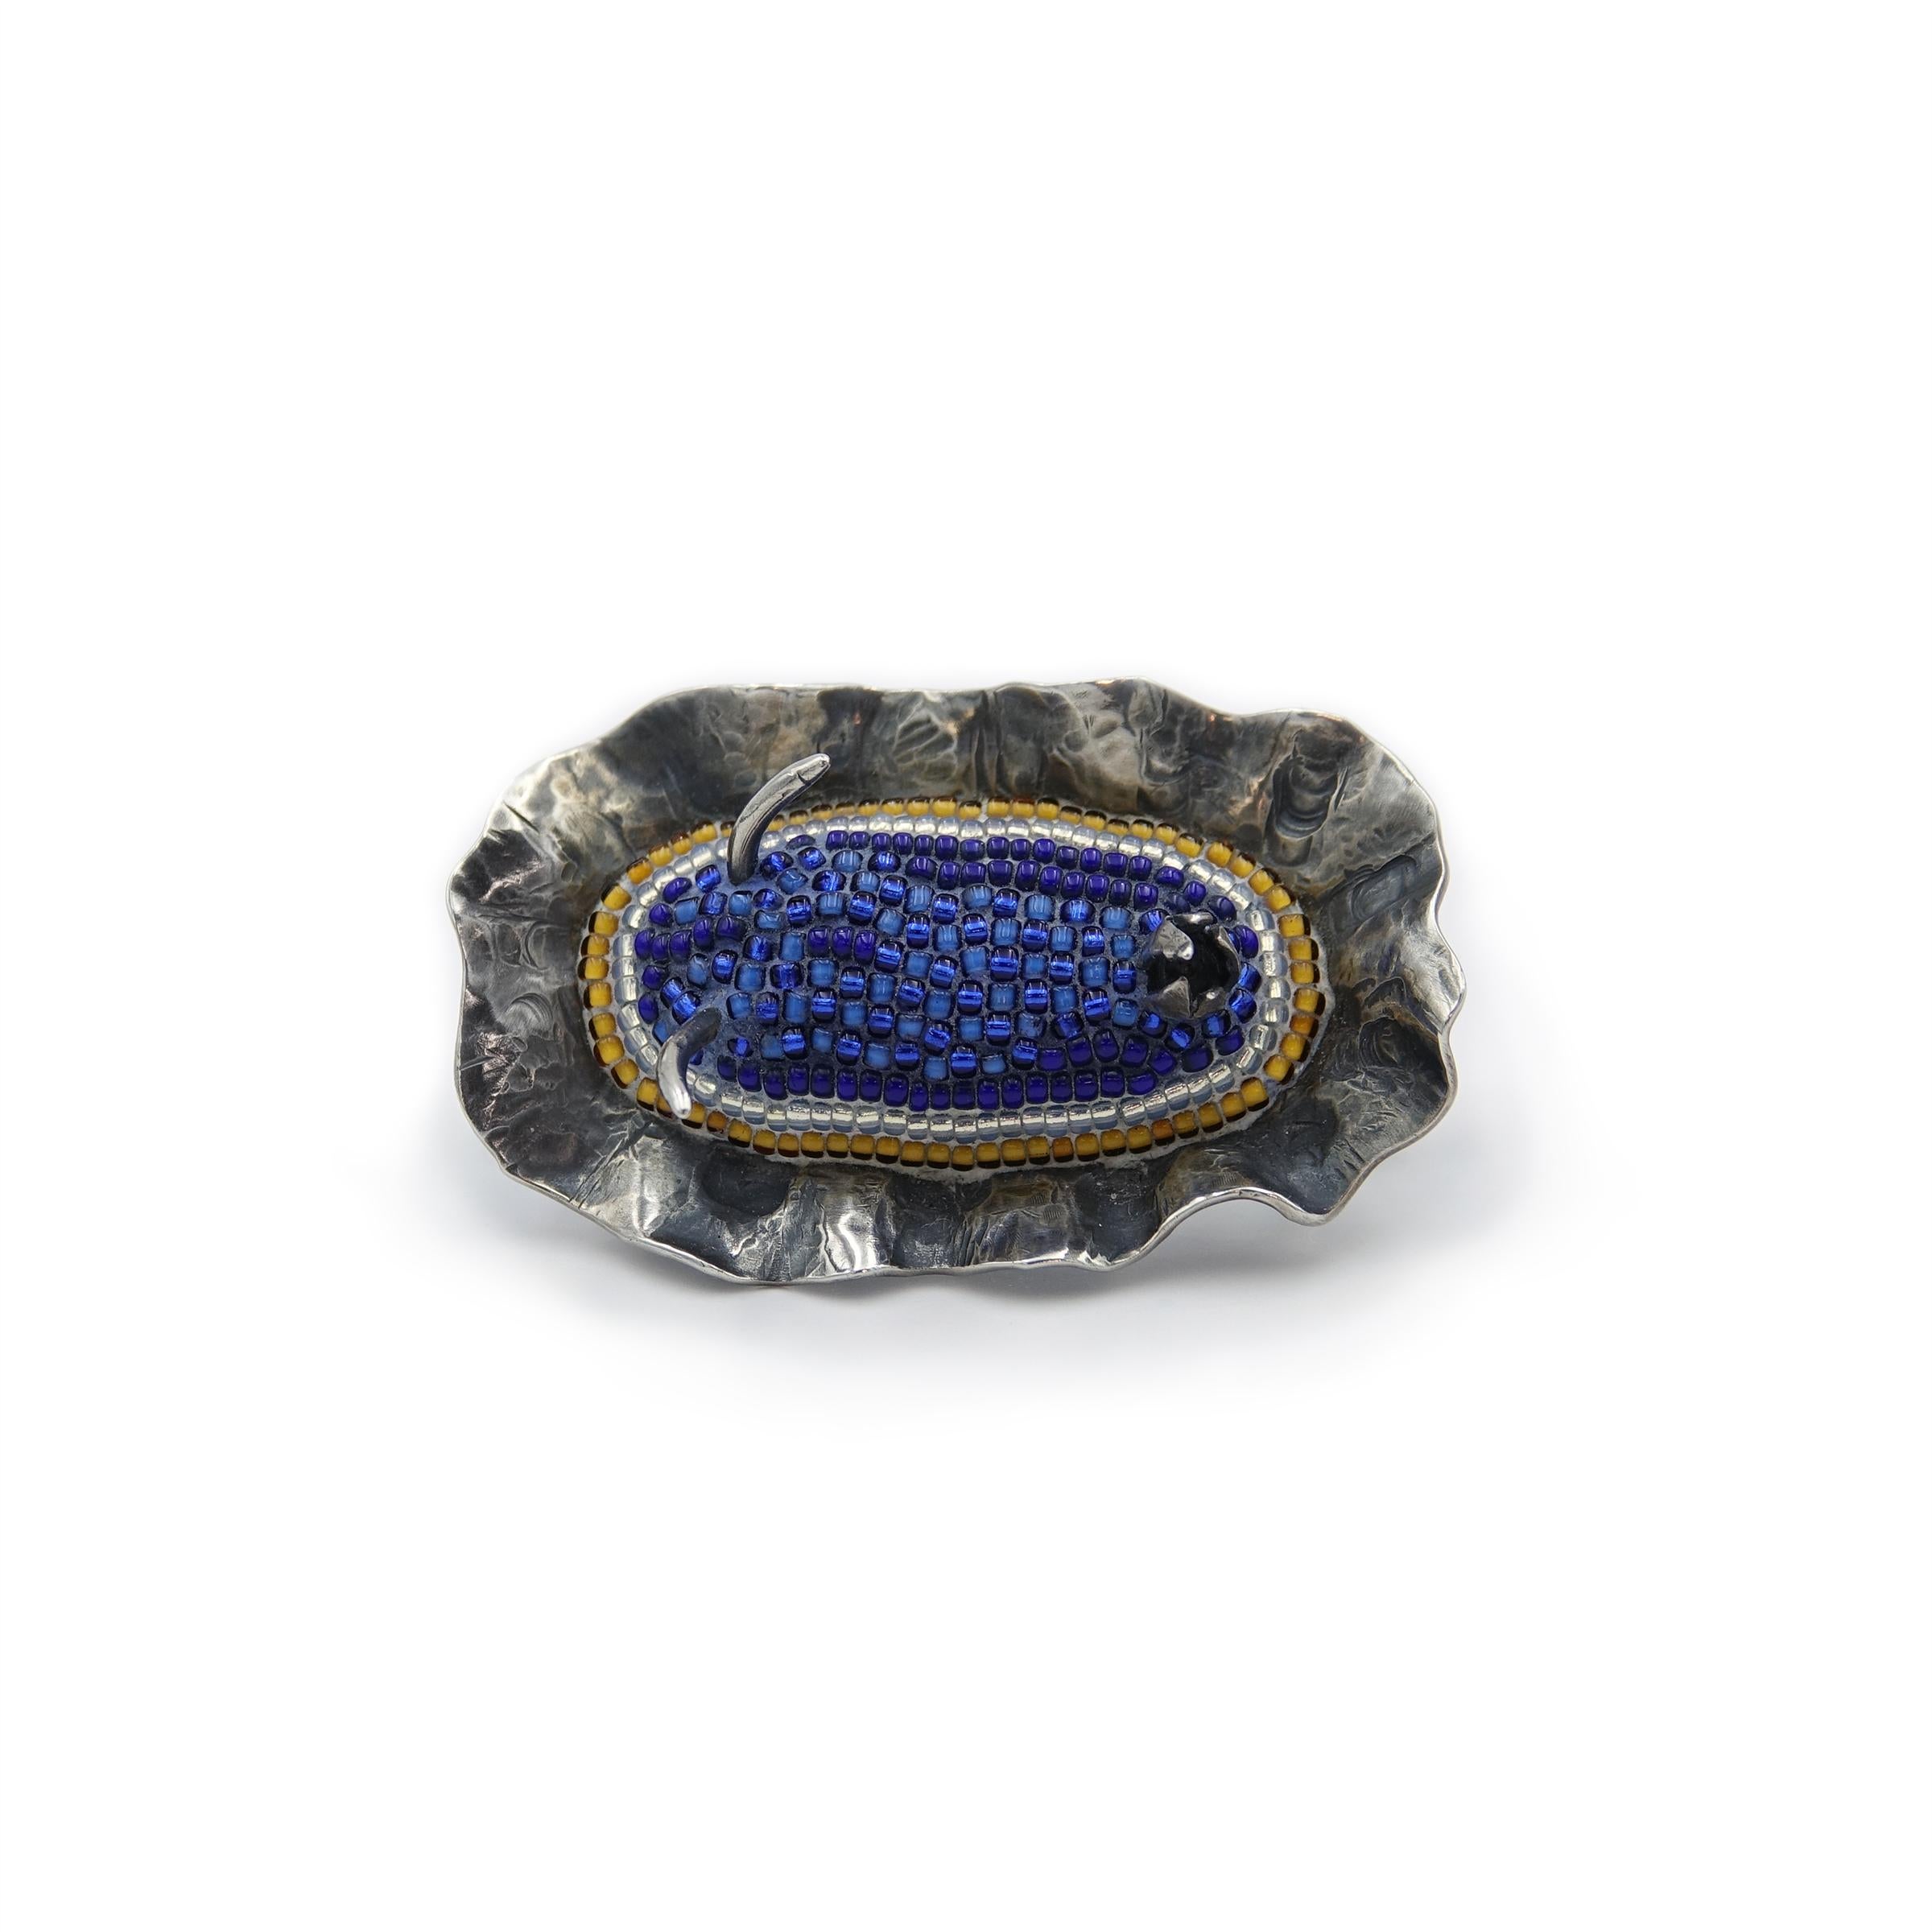 Hand-forged of sterling silver, inlaid with tiny glass seed beads, this micro-mosaic brooch has two tie tack-style pins on the back for versatility and security. 

Part of a body of work created to raise awareness for the world's oceans. Nudibranchs